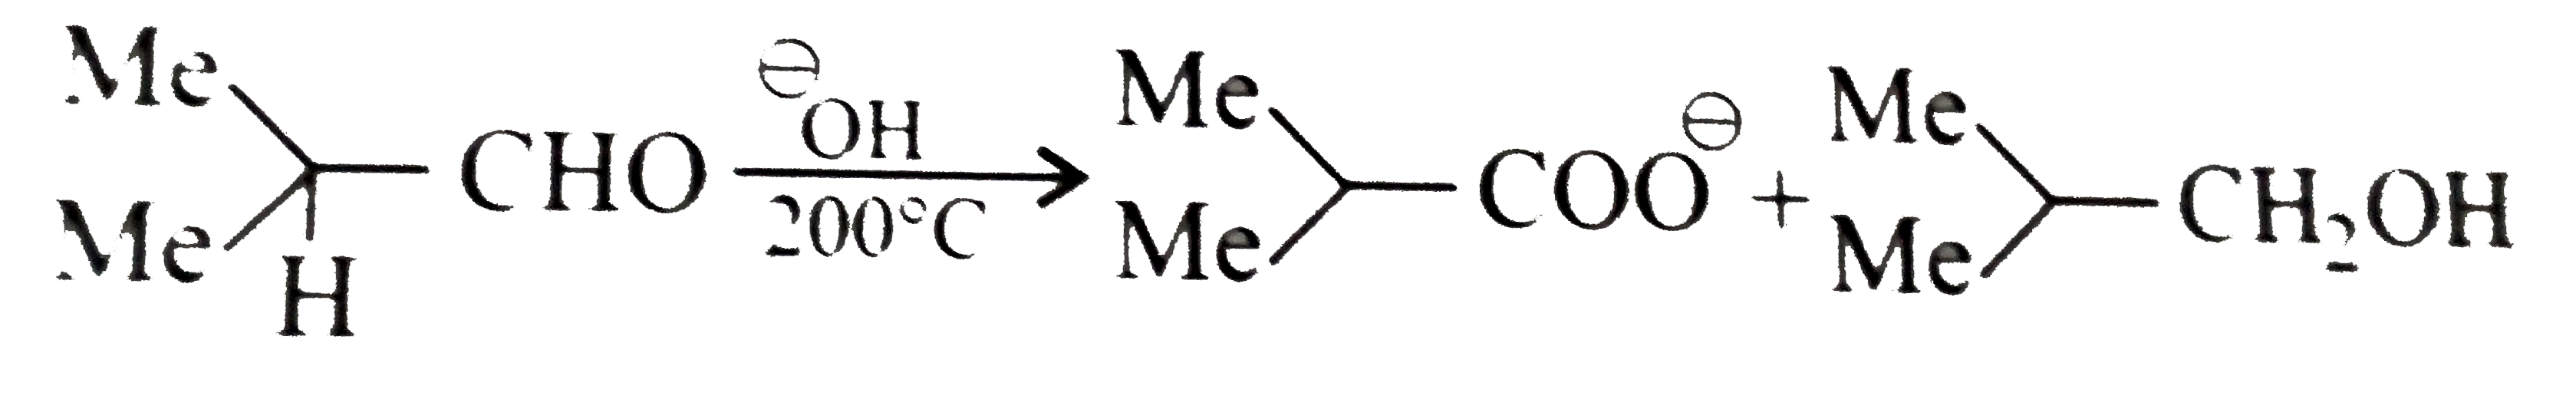 Assertion (A): The following reaction occurs.      Reason (R ): Undergoes disproportionation reaction since the mobility of alpha-H atom is arrested by the steric effect of the two bulky methyl groups.